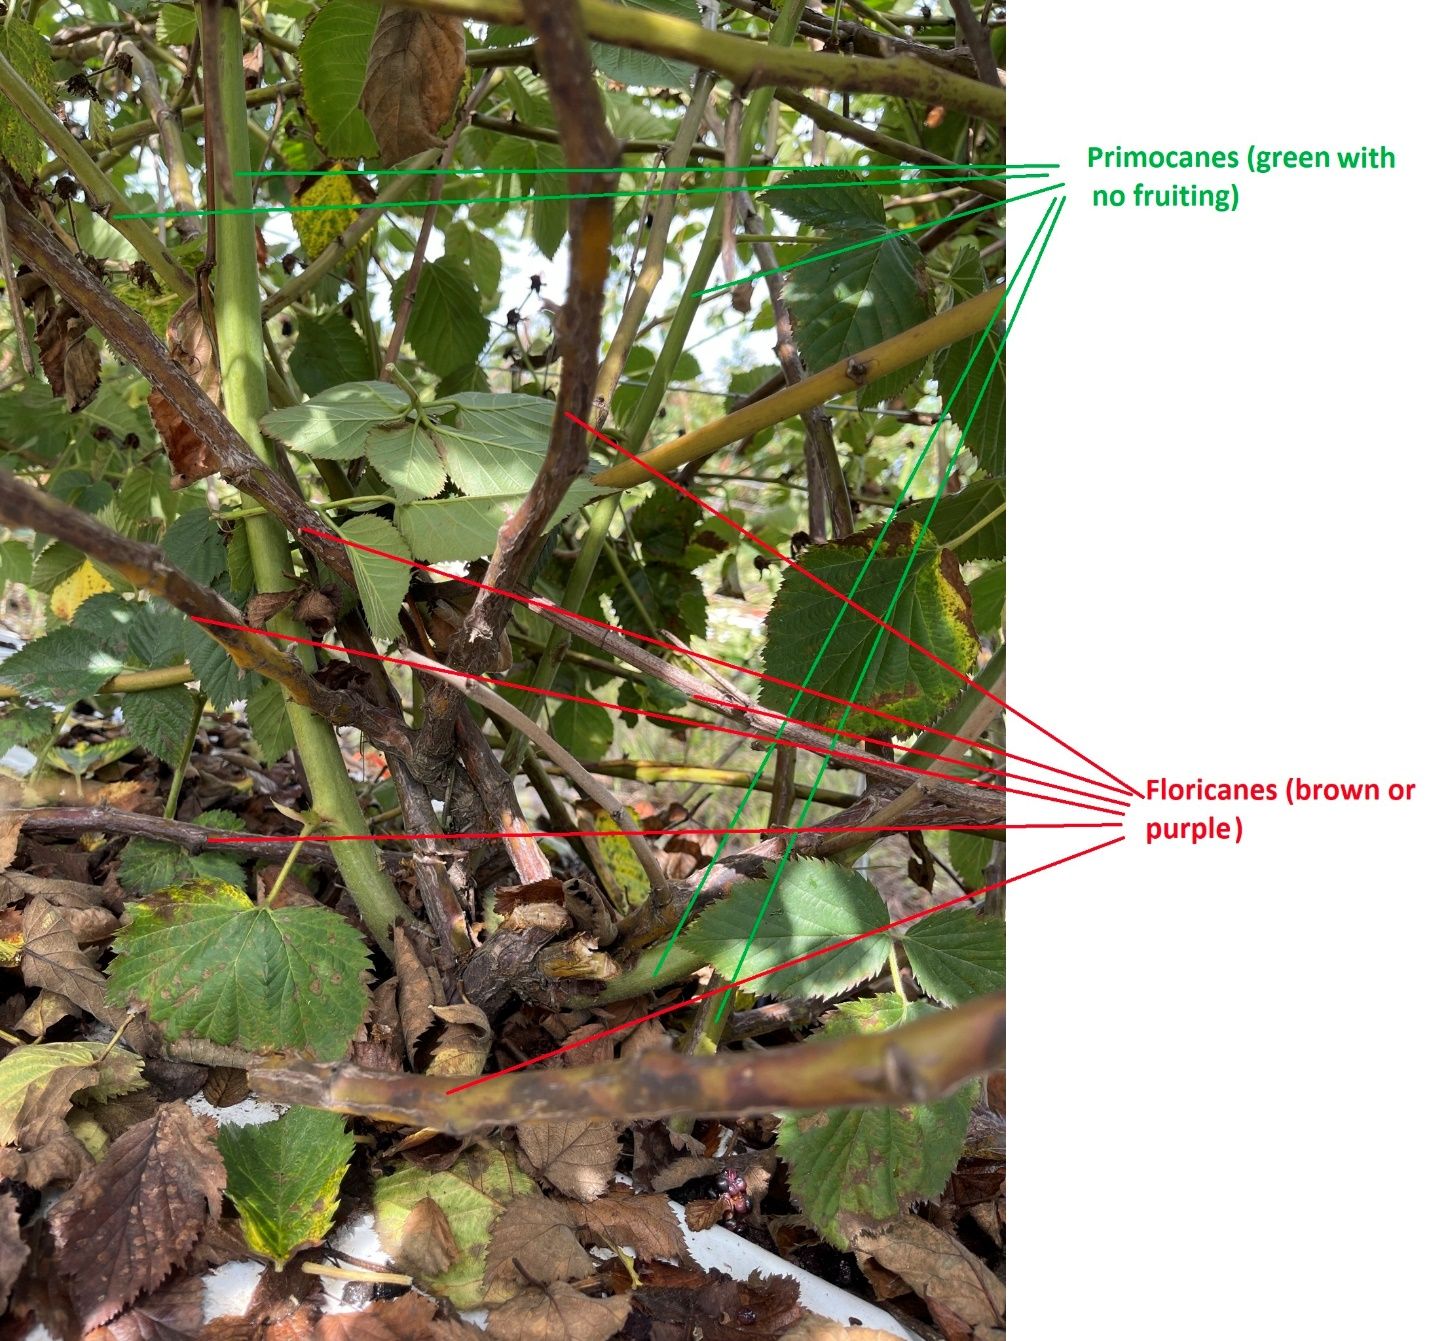 Primocanes (green bark/younger branches) and floricanes (brown bark/older branches) from the base of the plant.